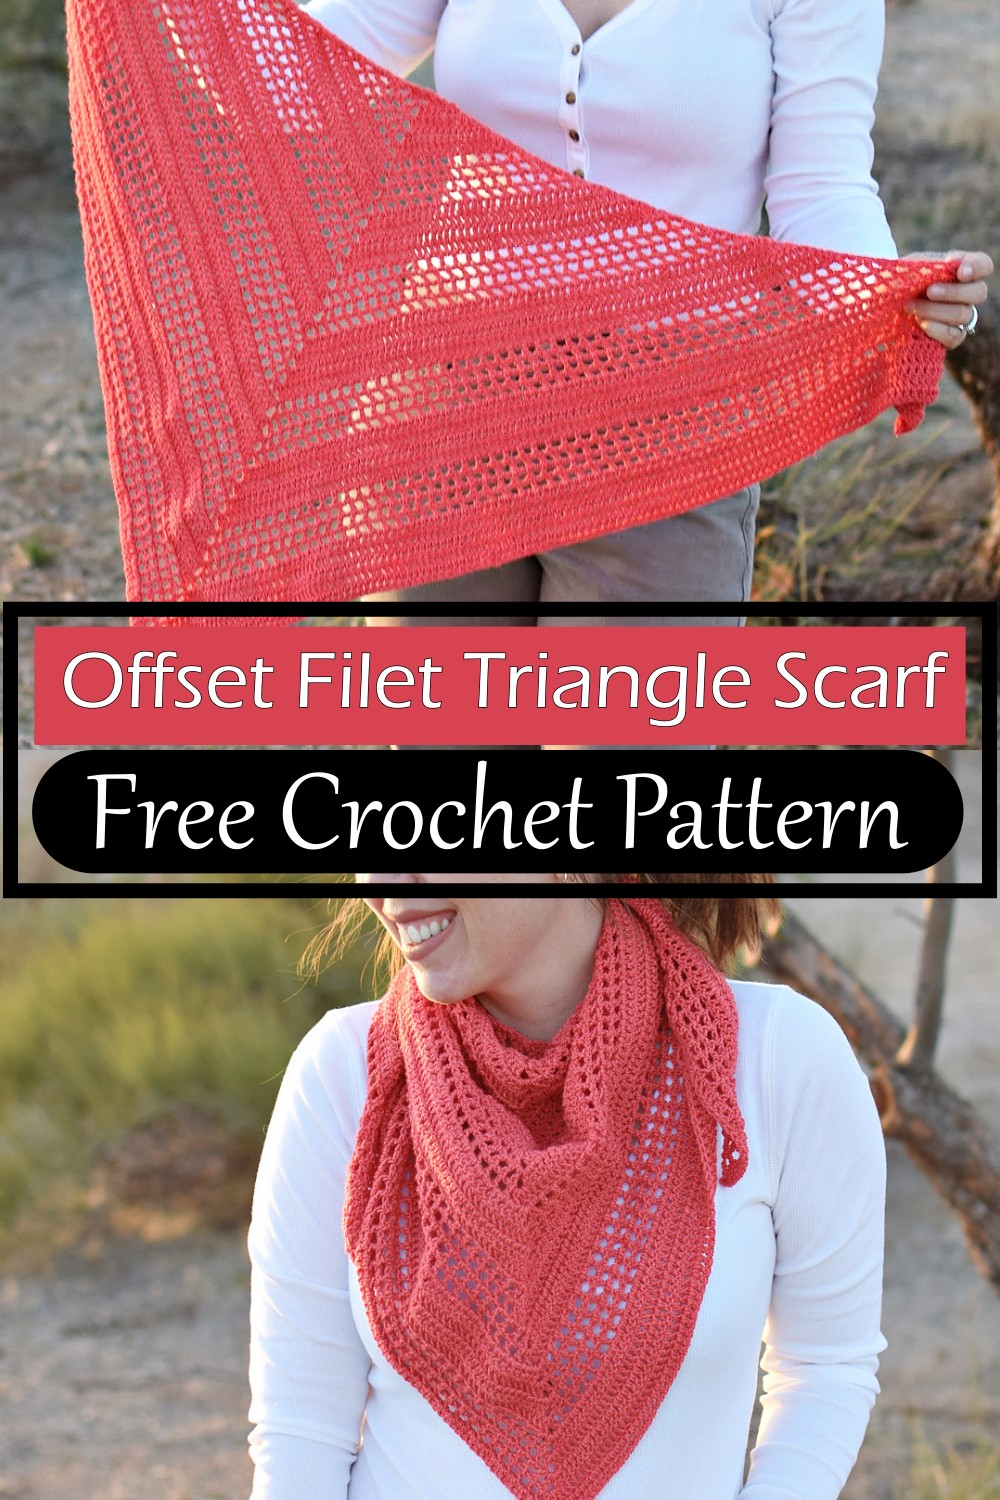 Offset Filet Triangle Scarf